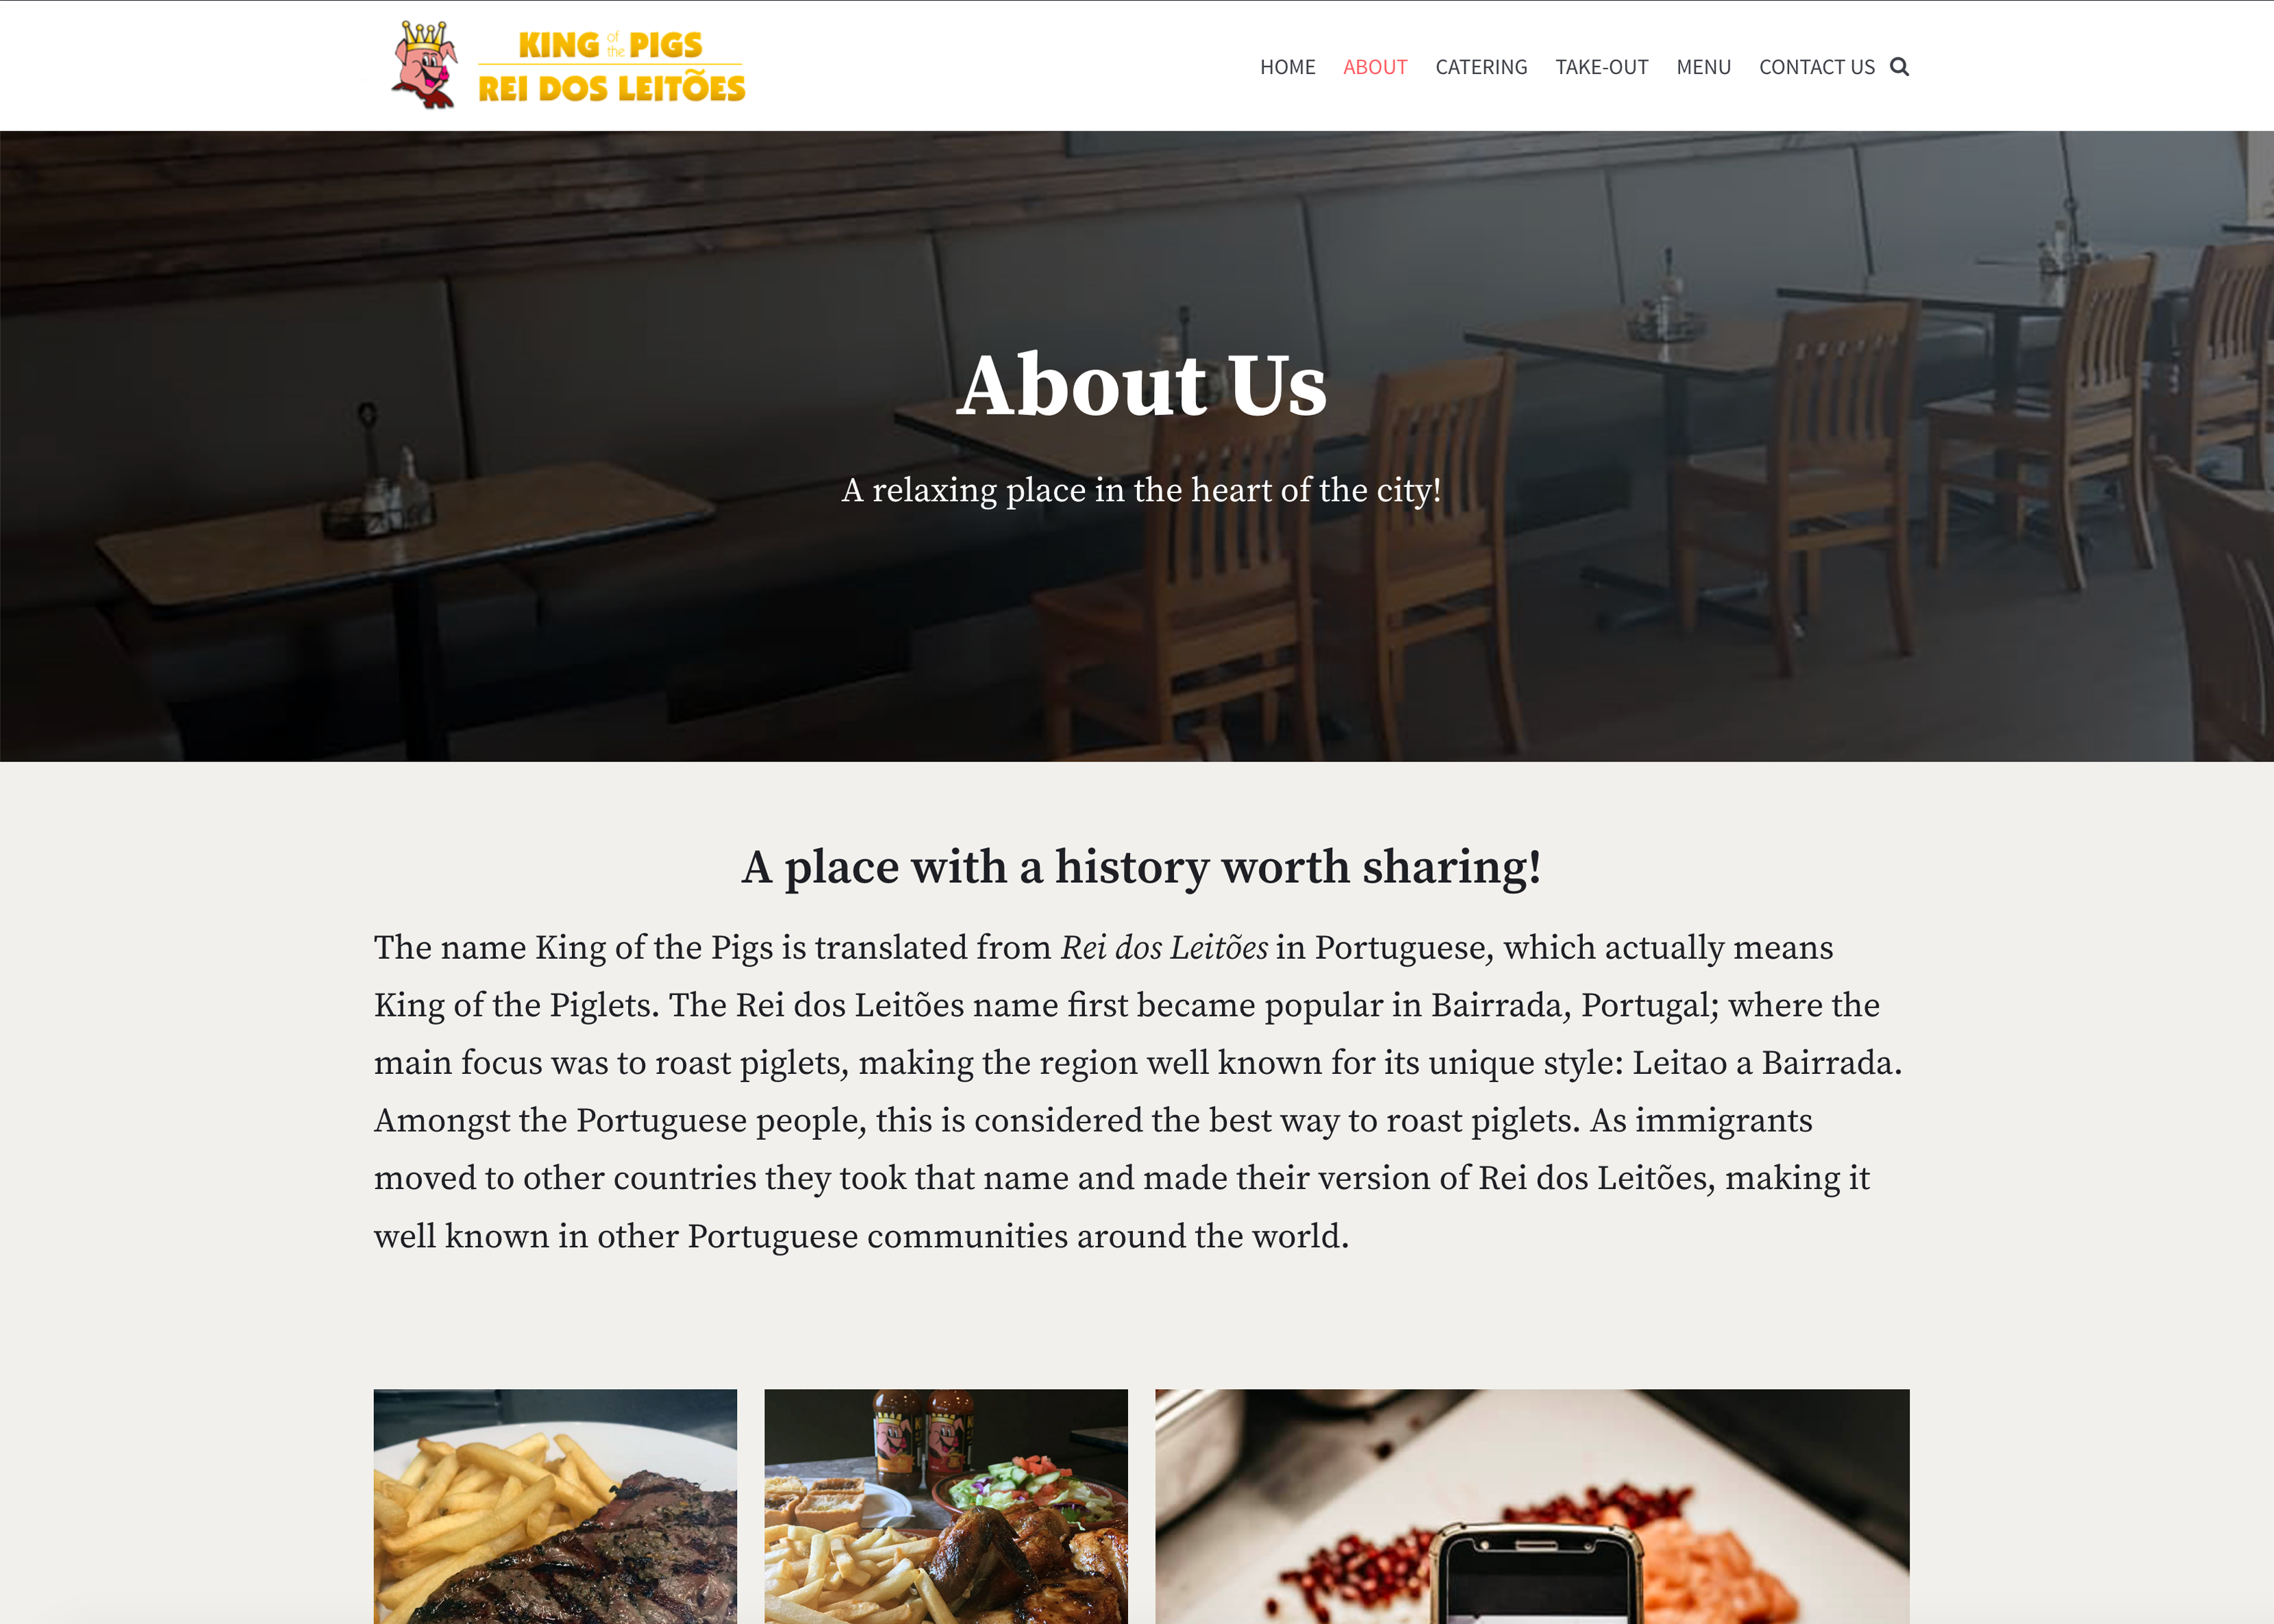 Restaurant Website About Page